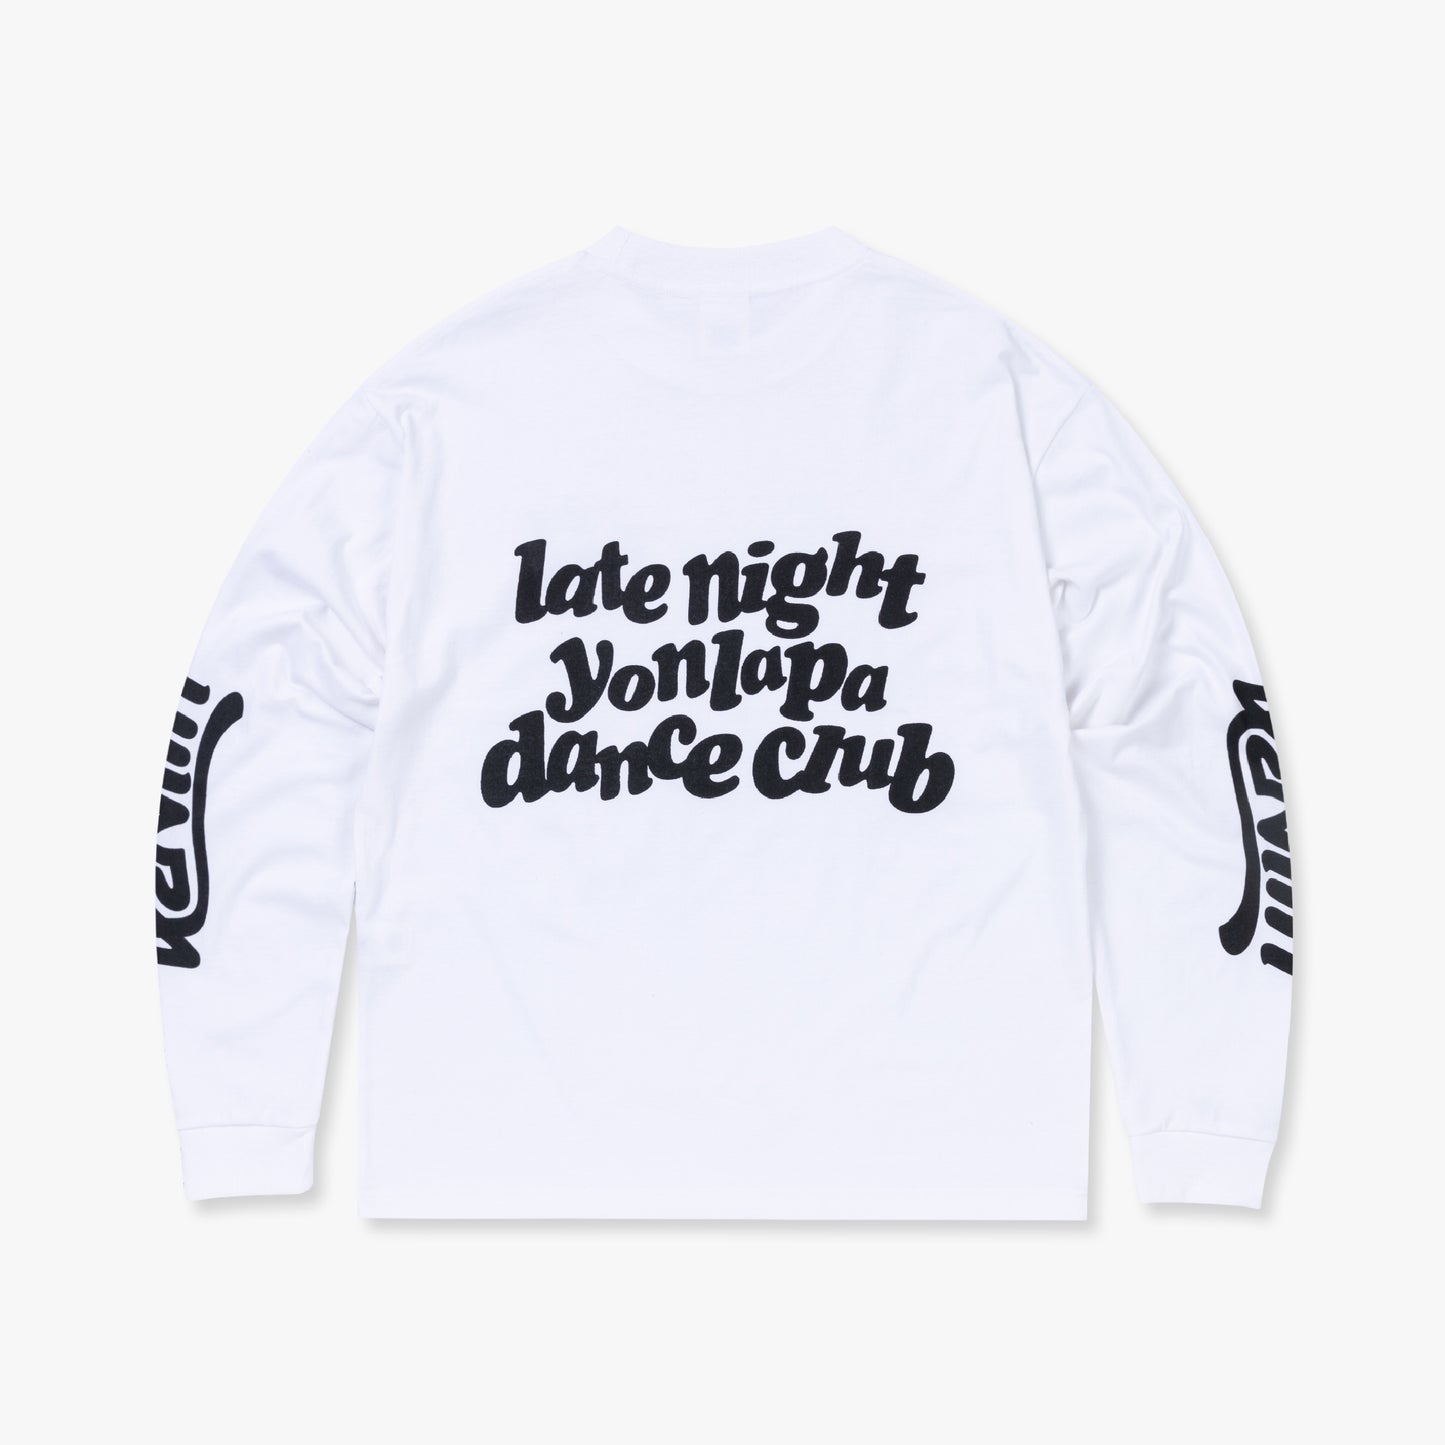 4 ROESE Party Long Sleeve Tee(White)